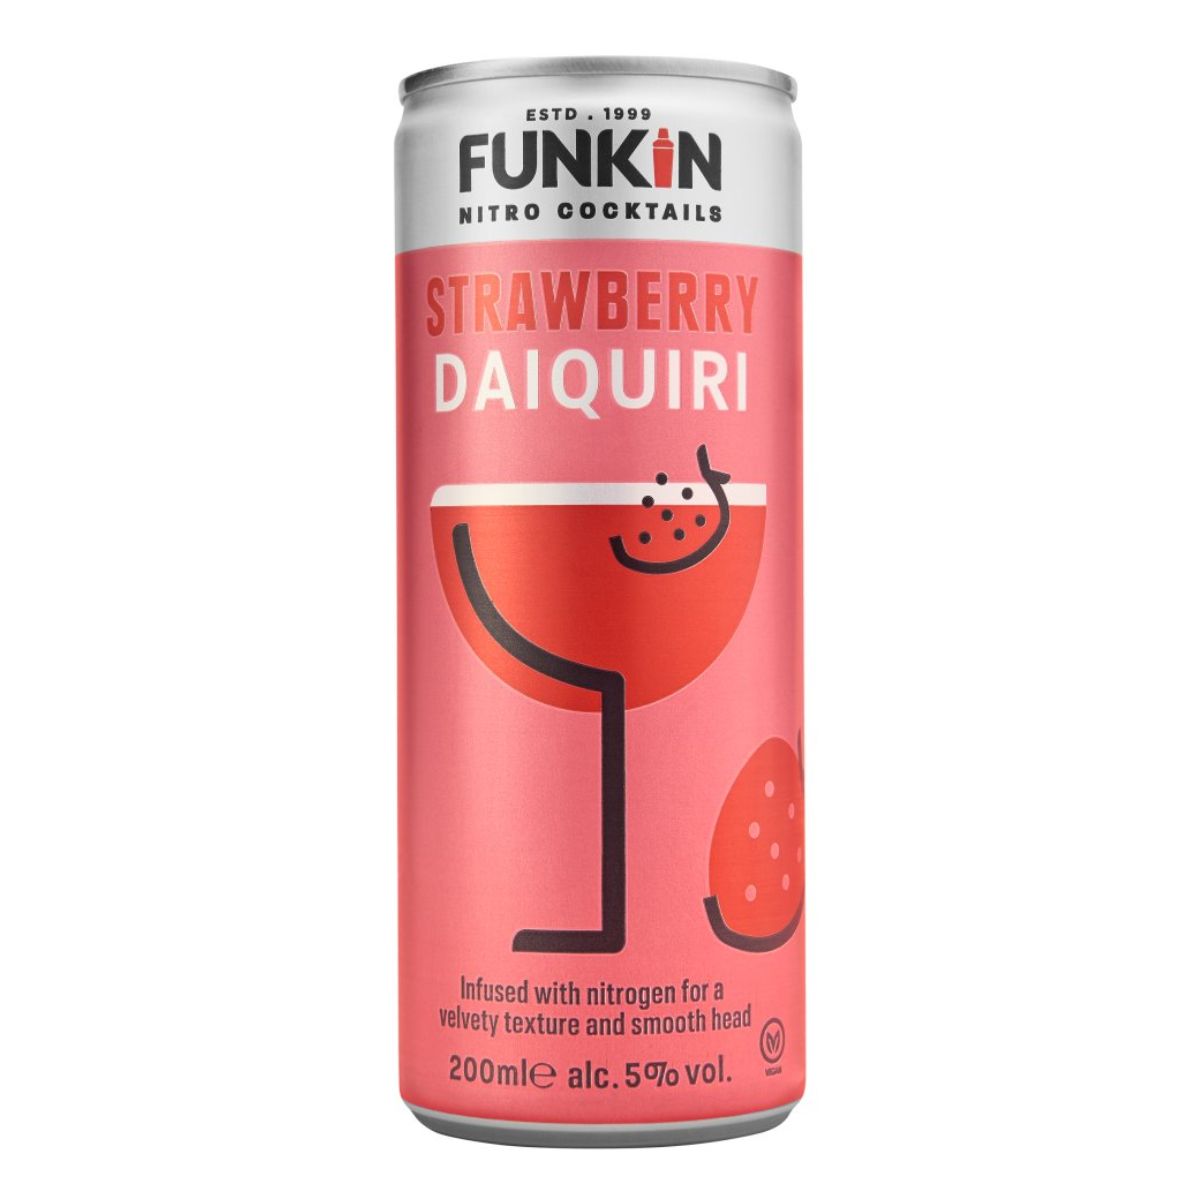 A can of Funkin Nitro Cocktails - Strawberry Daiquiri (5% ABV) - 200ml on a white background.